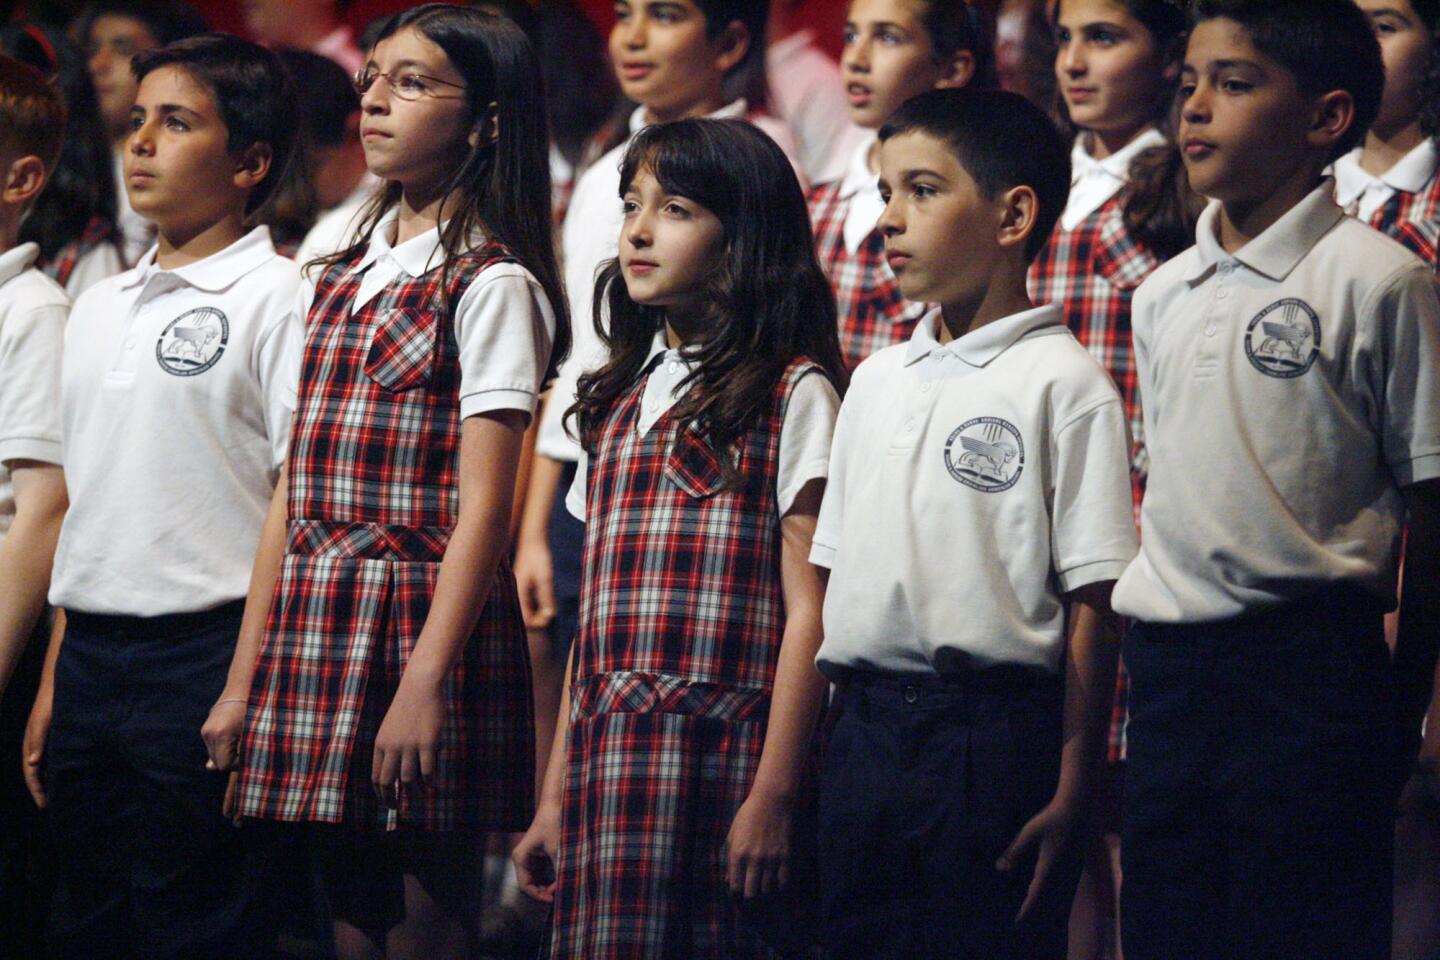 The Chamlian Armenian School Choir performs during the annual Armenian genocide commemoration, which took place a the Alex Theatre in Glendale on Thursday, April 24, 2013.